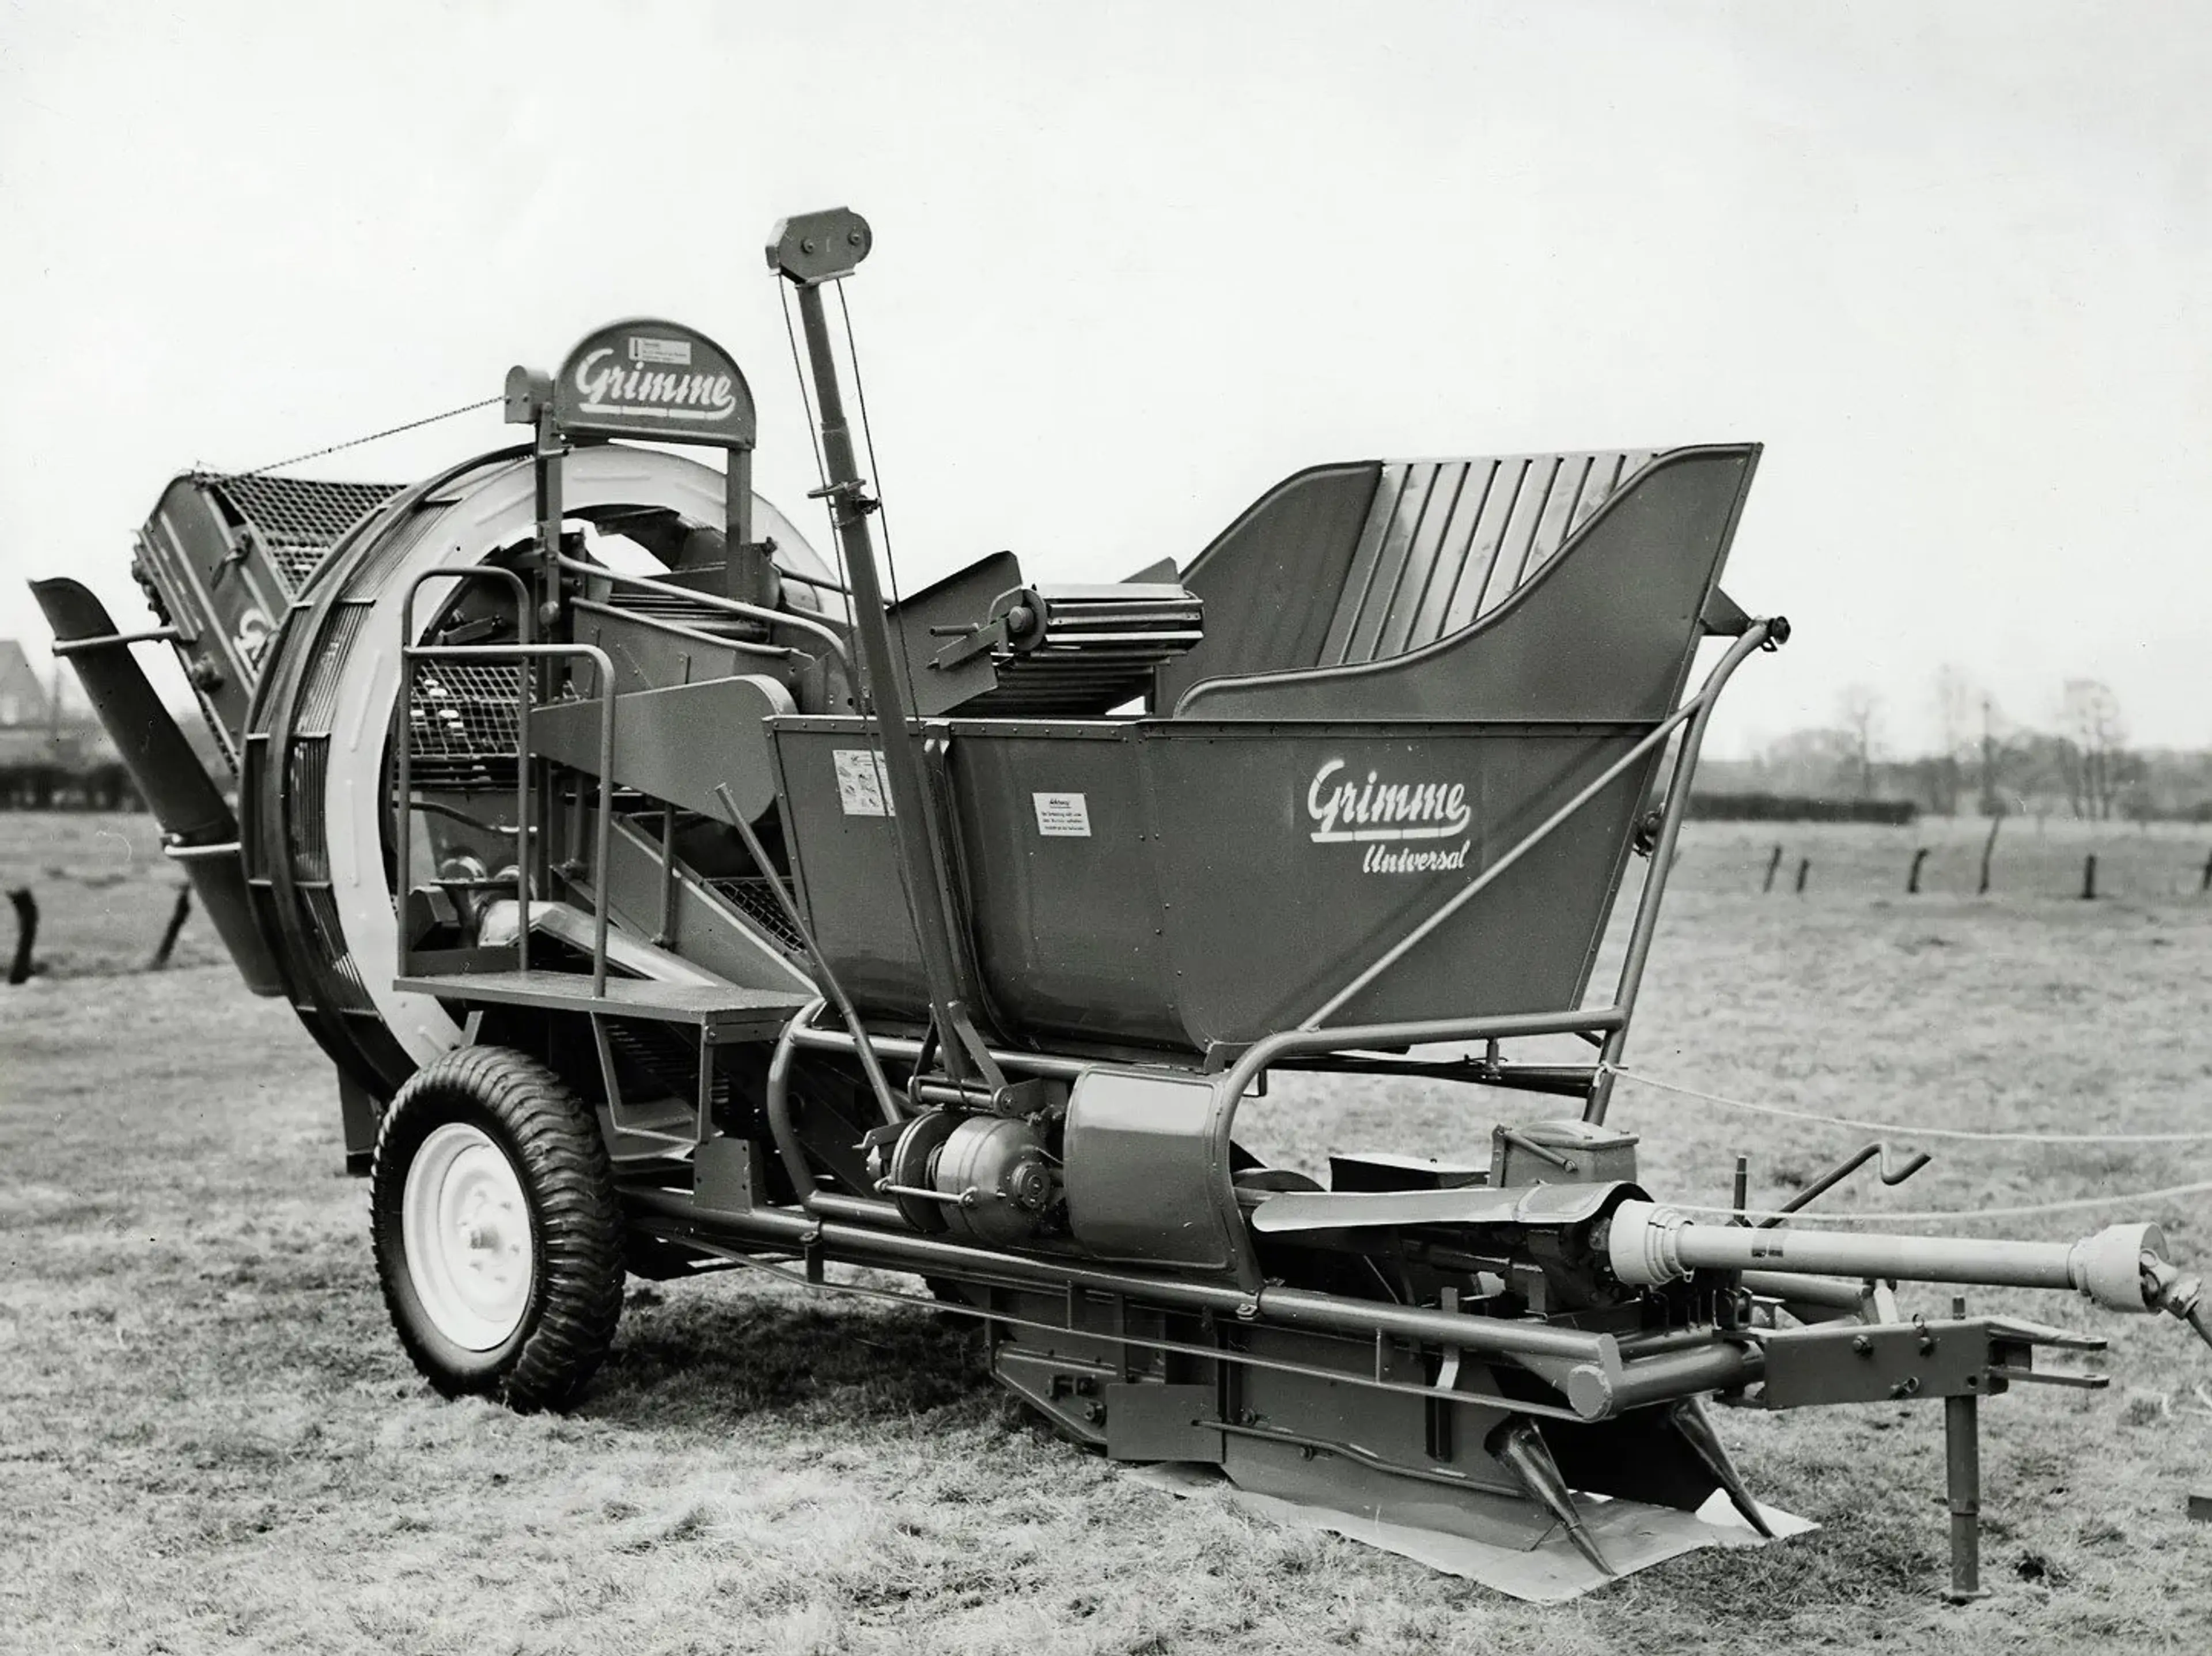 Historical picture of a trailed potato harvester, the model "GRIMME Universal".